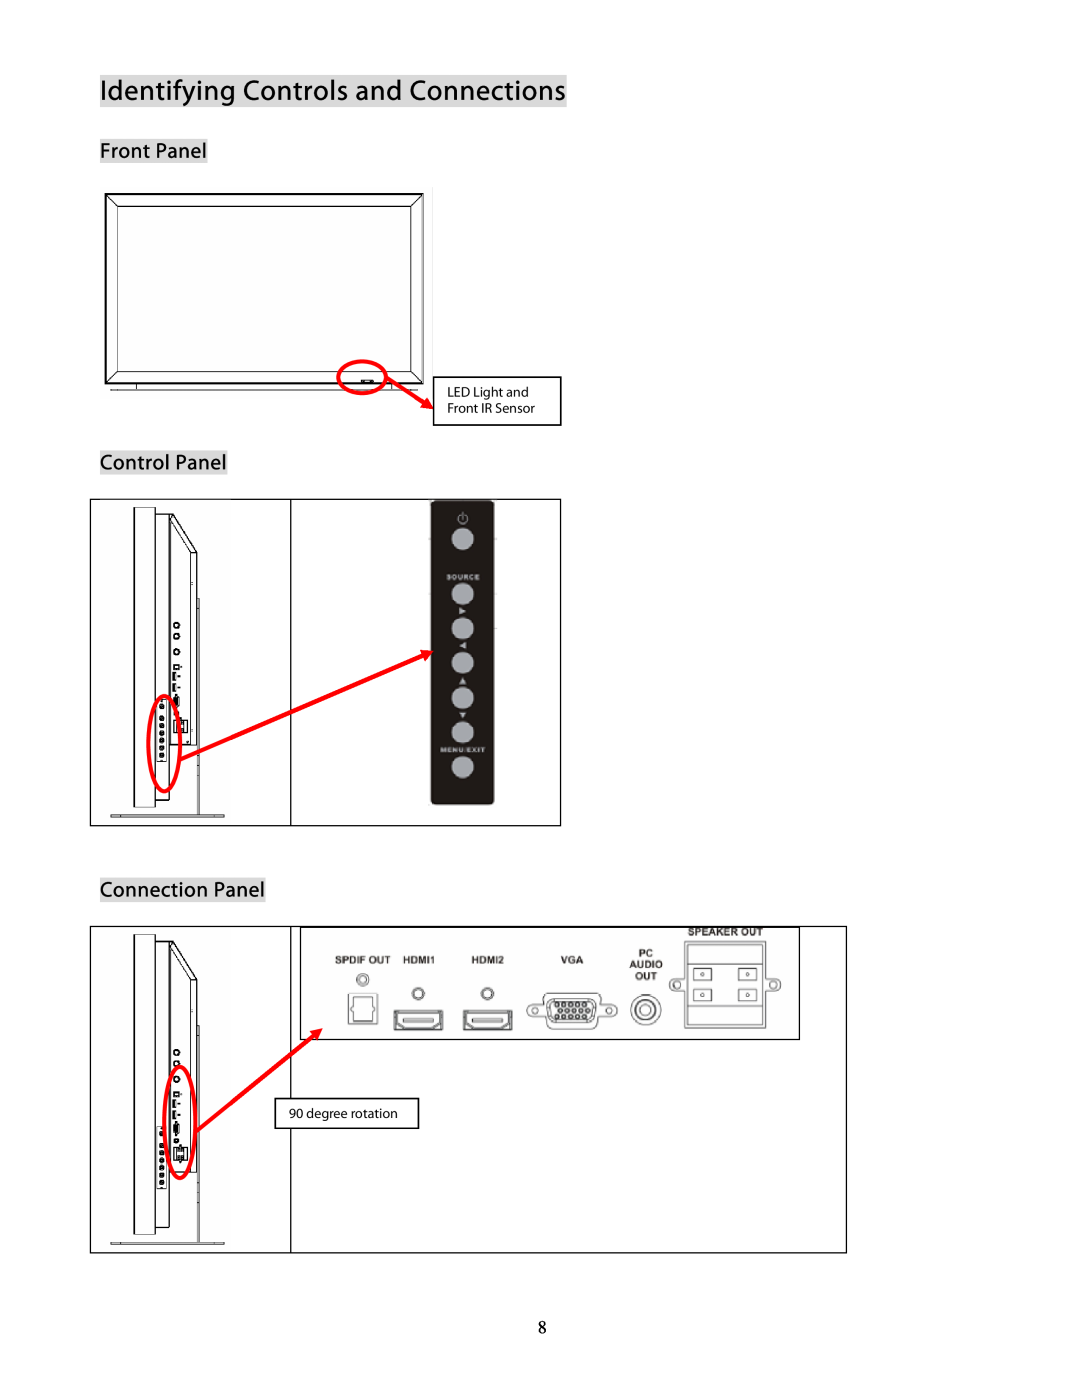 Planar PD370 user manual Identifying Controls and Connections, Front Panel, Control Panel Connection Panel, degree rotation 